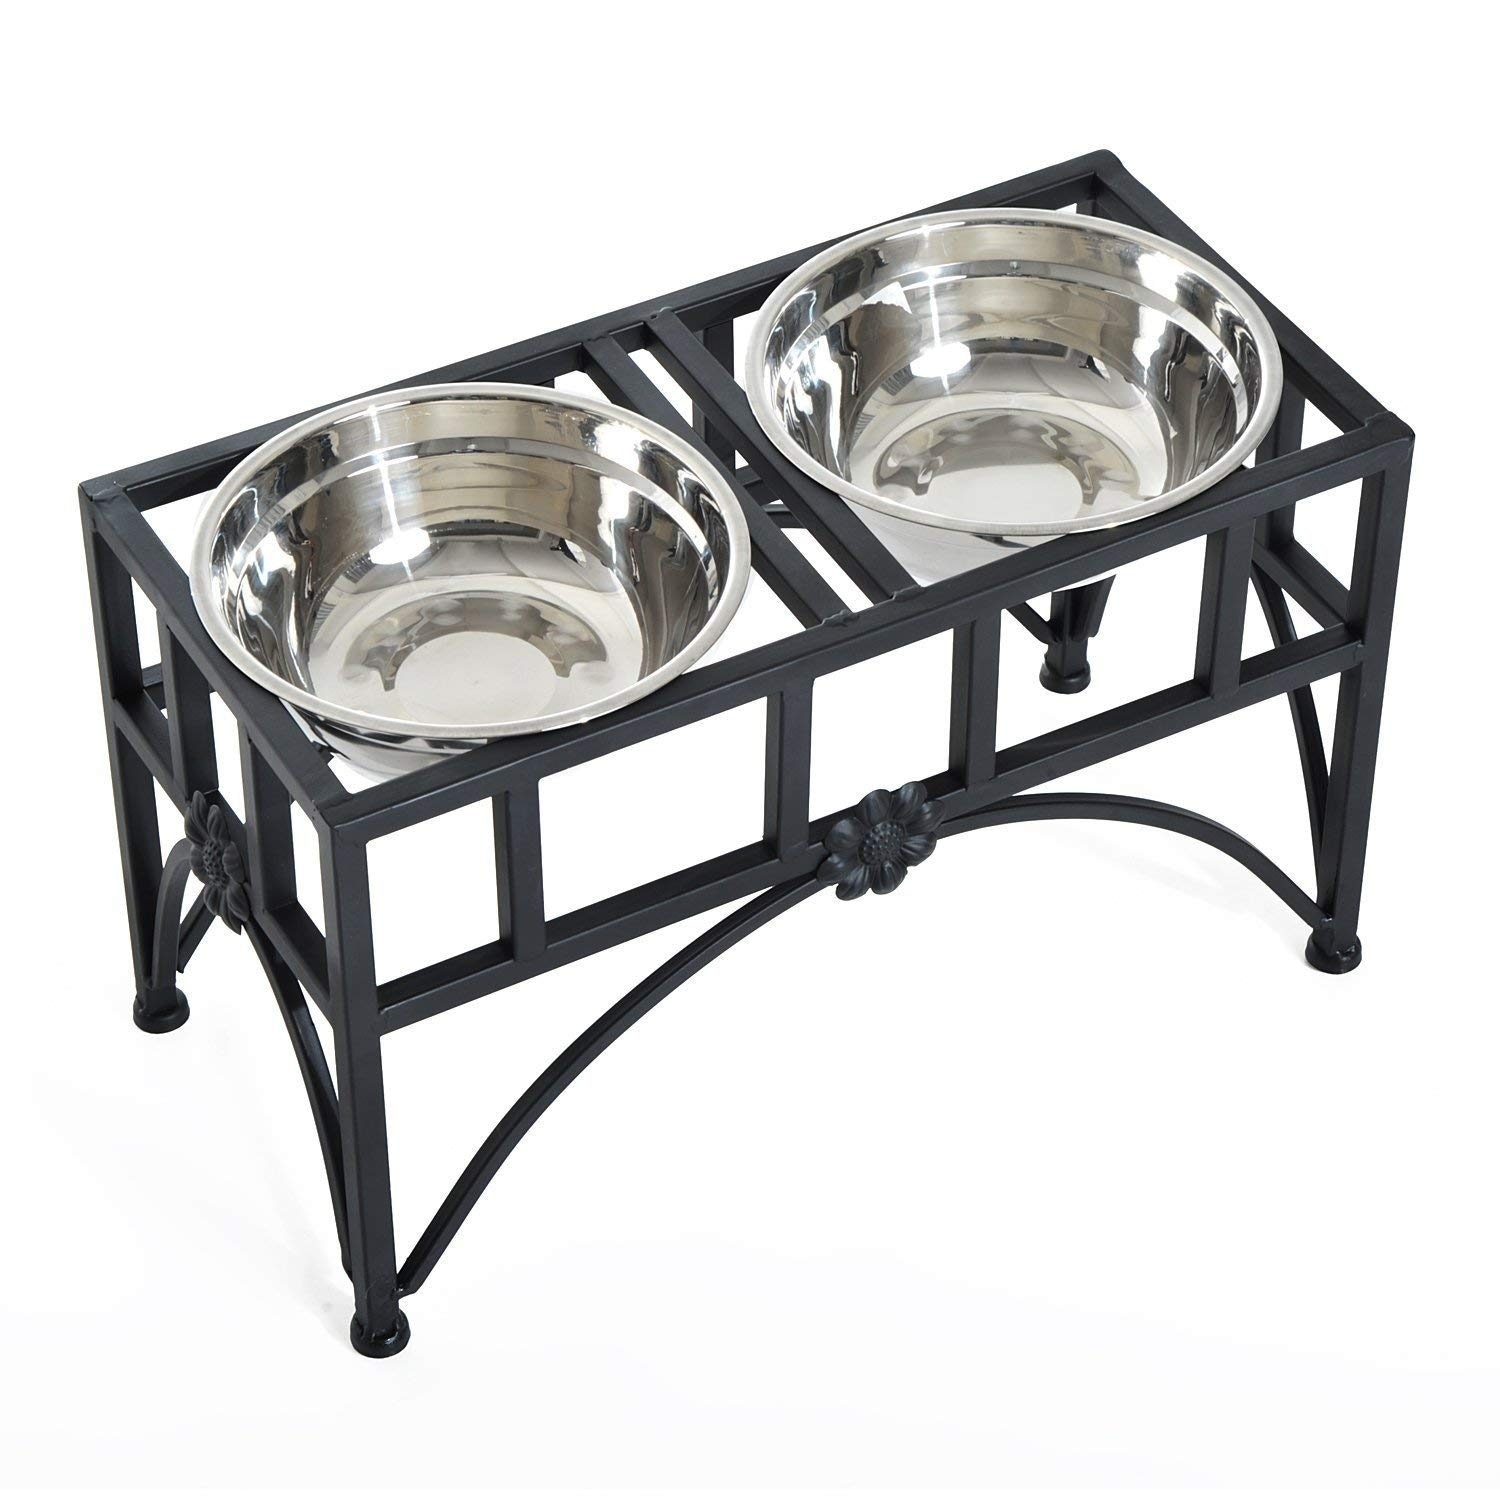 https://ak1.ostkcdn.com/images/products/22408080/PawHut-17-Double-Stainless-Steel-Heavy-Duty-Dog-Food-Bowl-Pet-Elevated-Feeding-Station-40653248-fa80-4603-856f-4bbc13d7a790.jpg